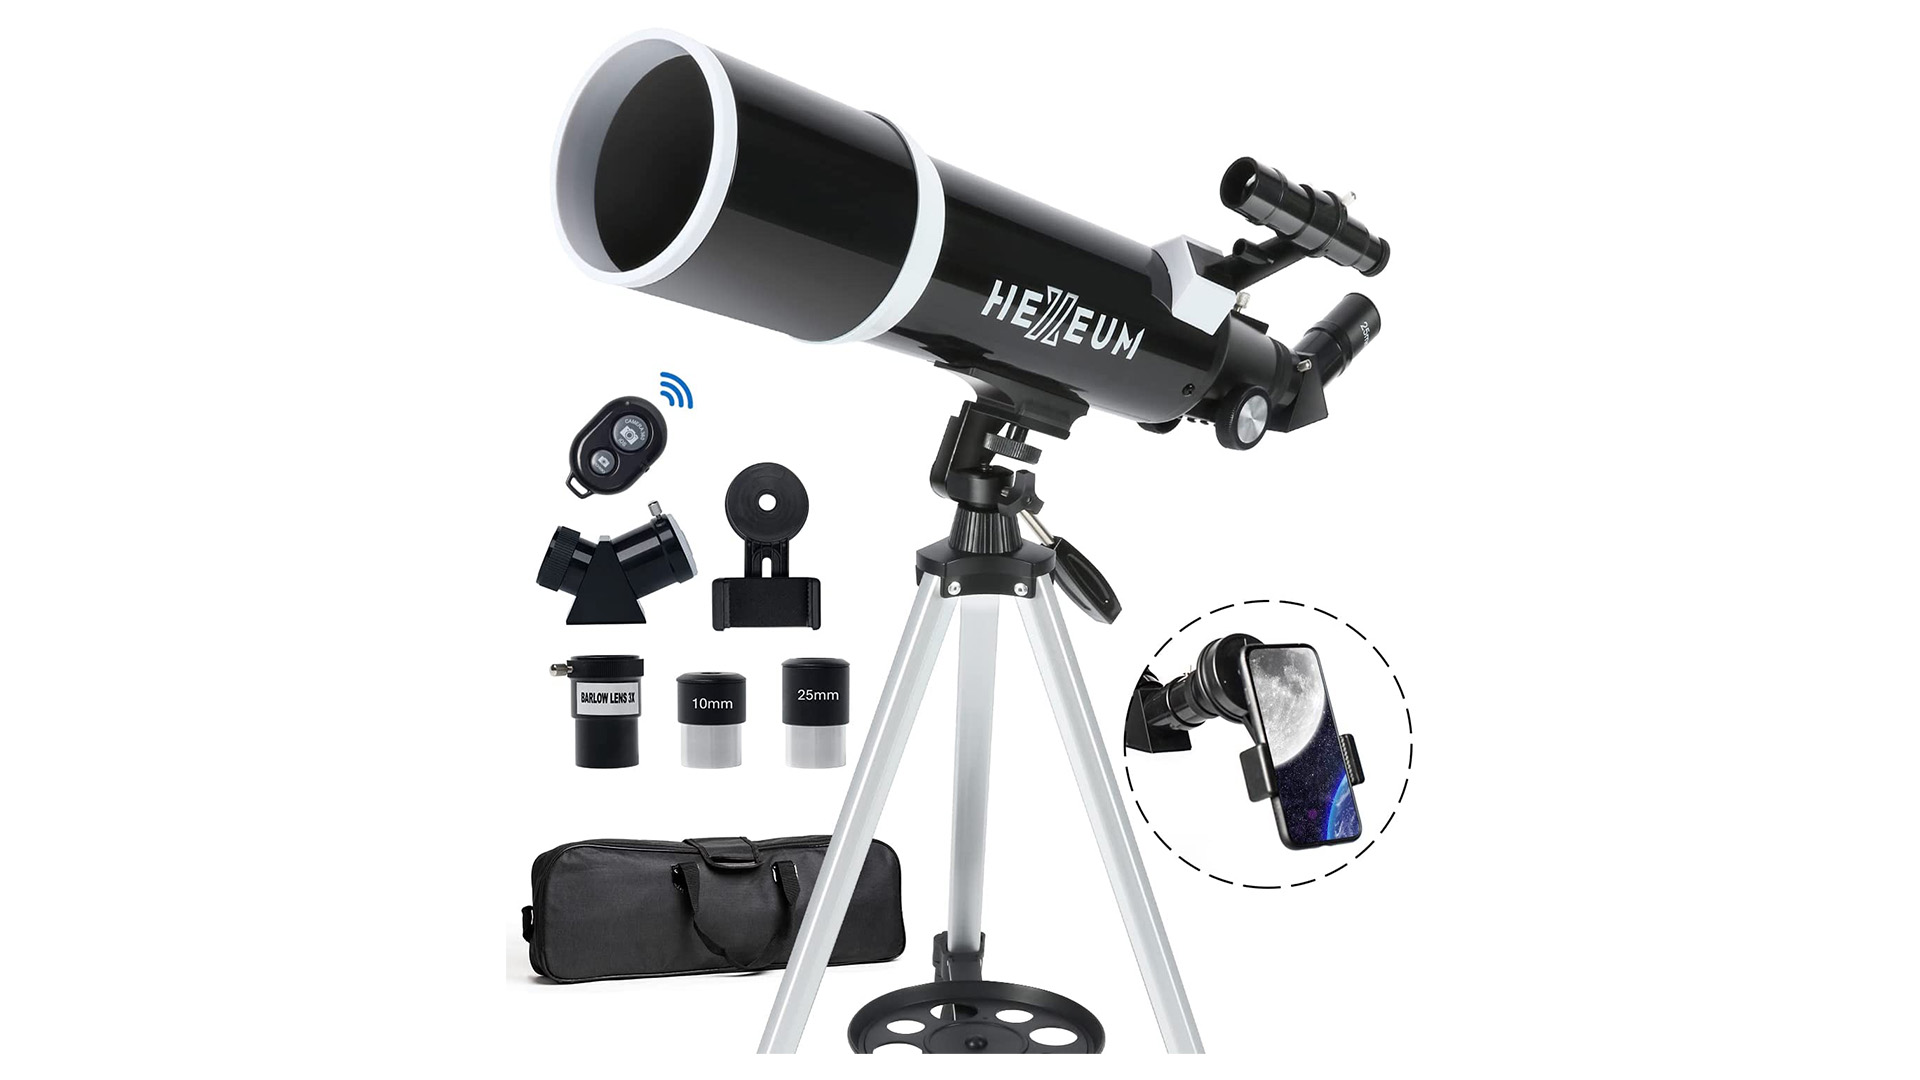 Gaze beyond the stars with this Hexeum Telescope Set, now over 50% off at Amazon